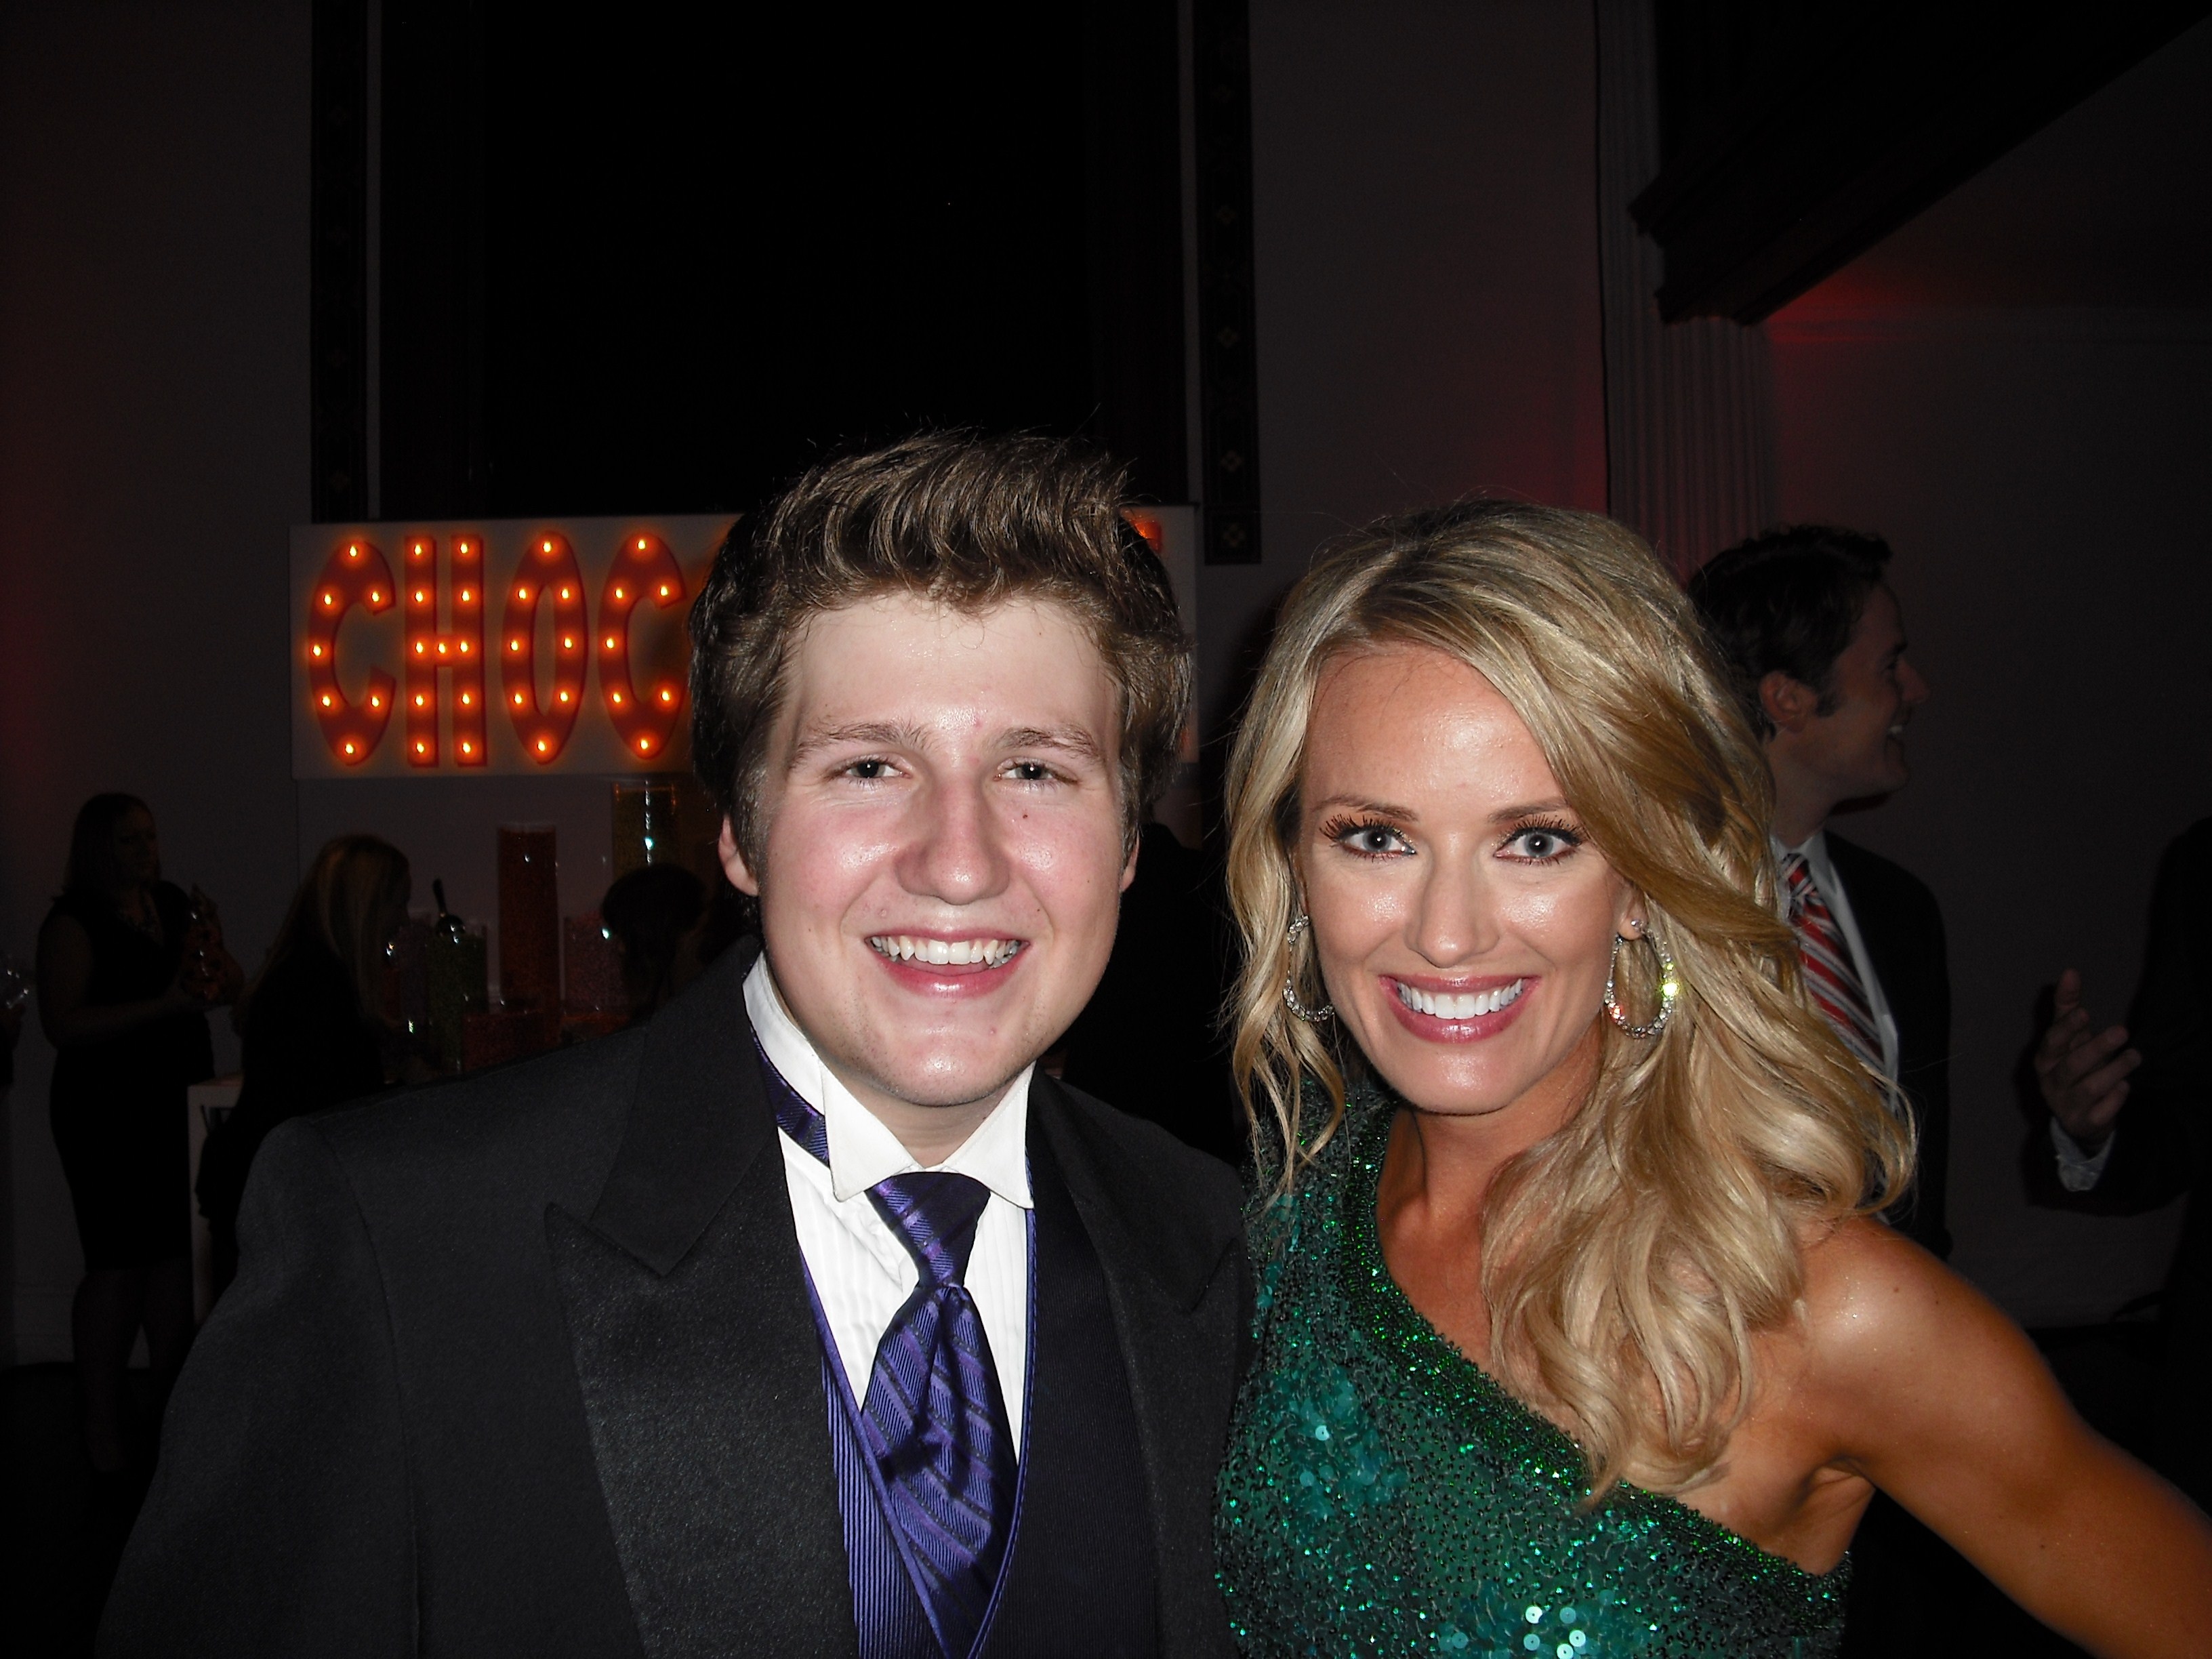 David with The Insider's Brooke Anderson at Entertainment Tonight's Emmy After Party